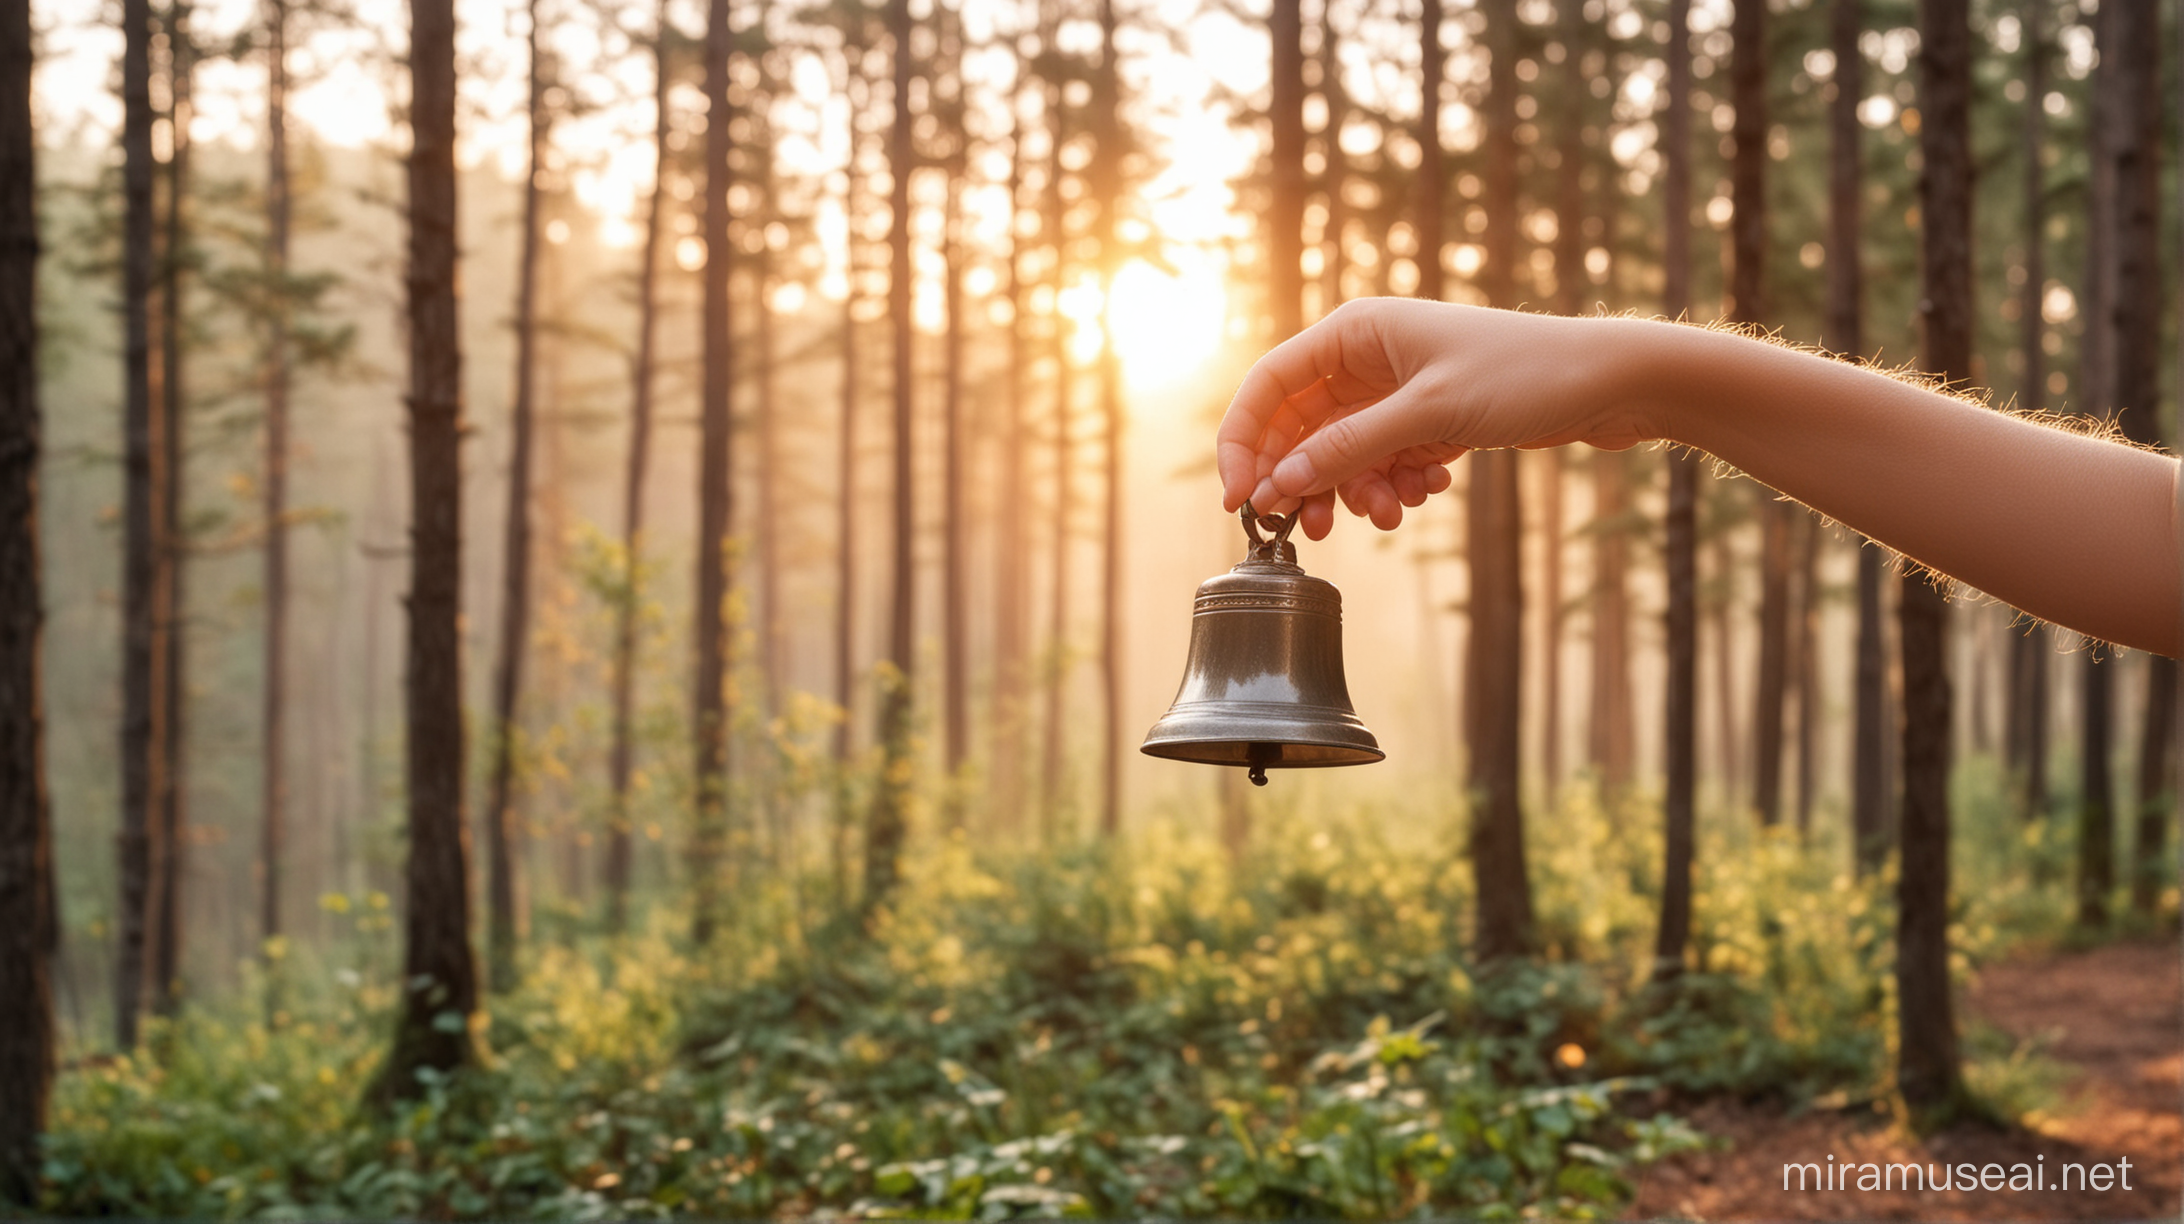 Childs hand ringing bell with forest in blurred background at sunrise